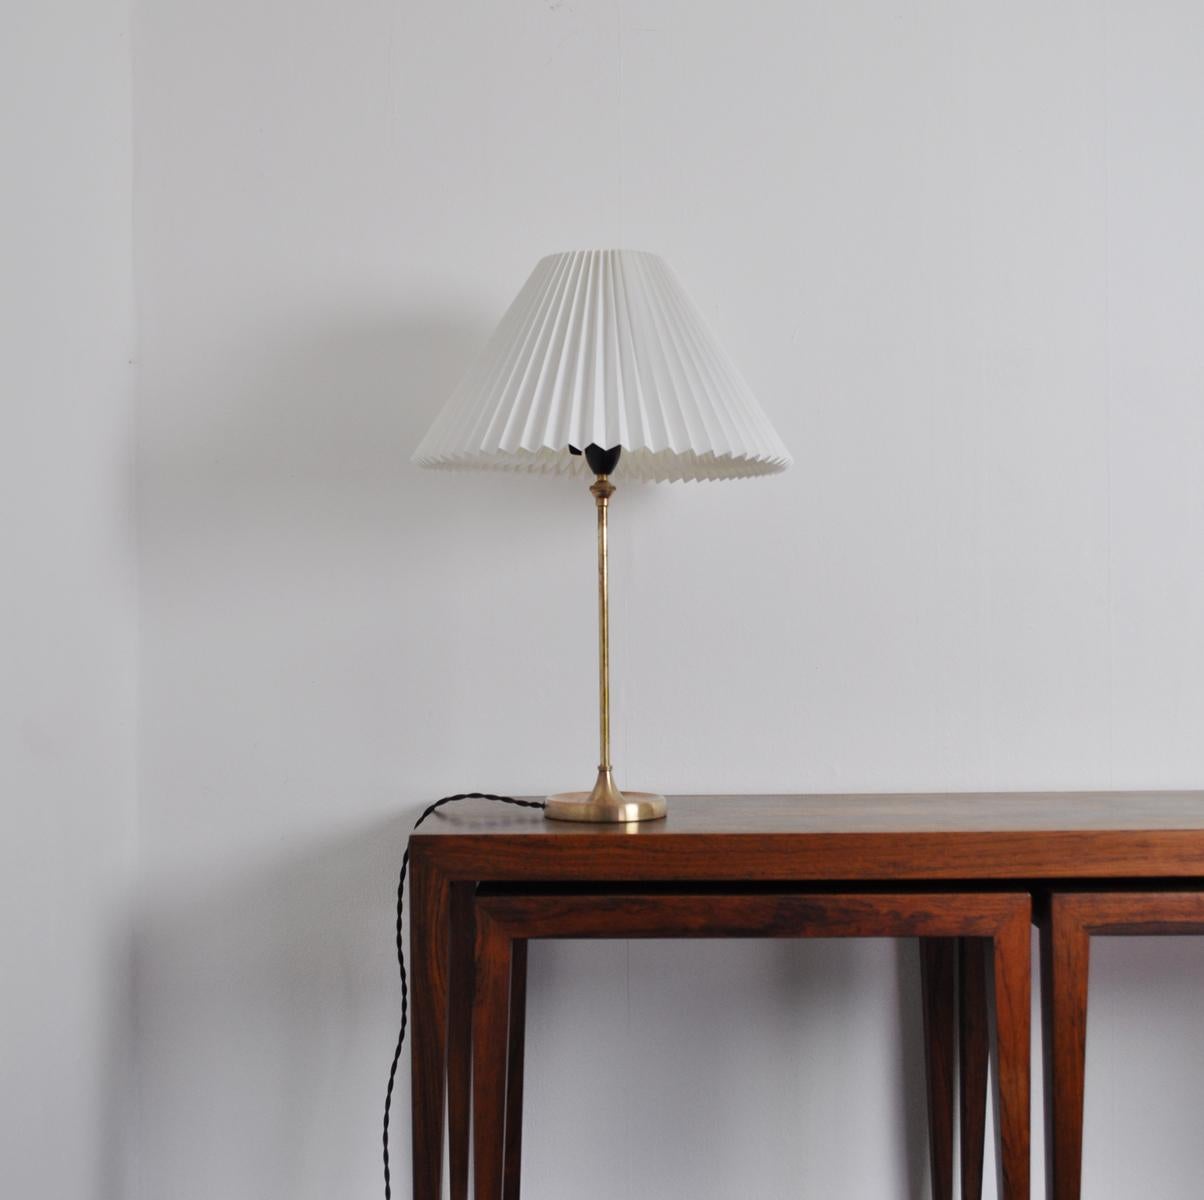 Old Model 307 table lamp designed 1948 by Esben Klint for the Danish lamp manufacturer Le Klint.

The table lamp is made of brass. This is a old model and therefore the brass contains a higher percentage of copper which gives a reddish glow. It